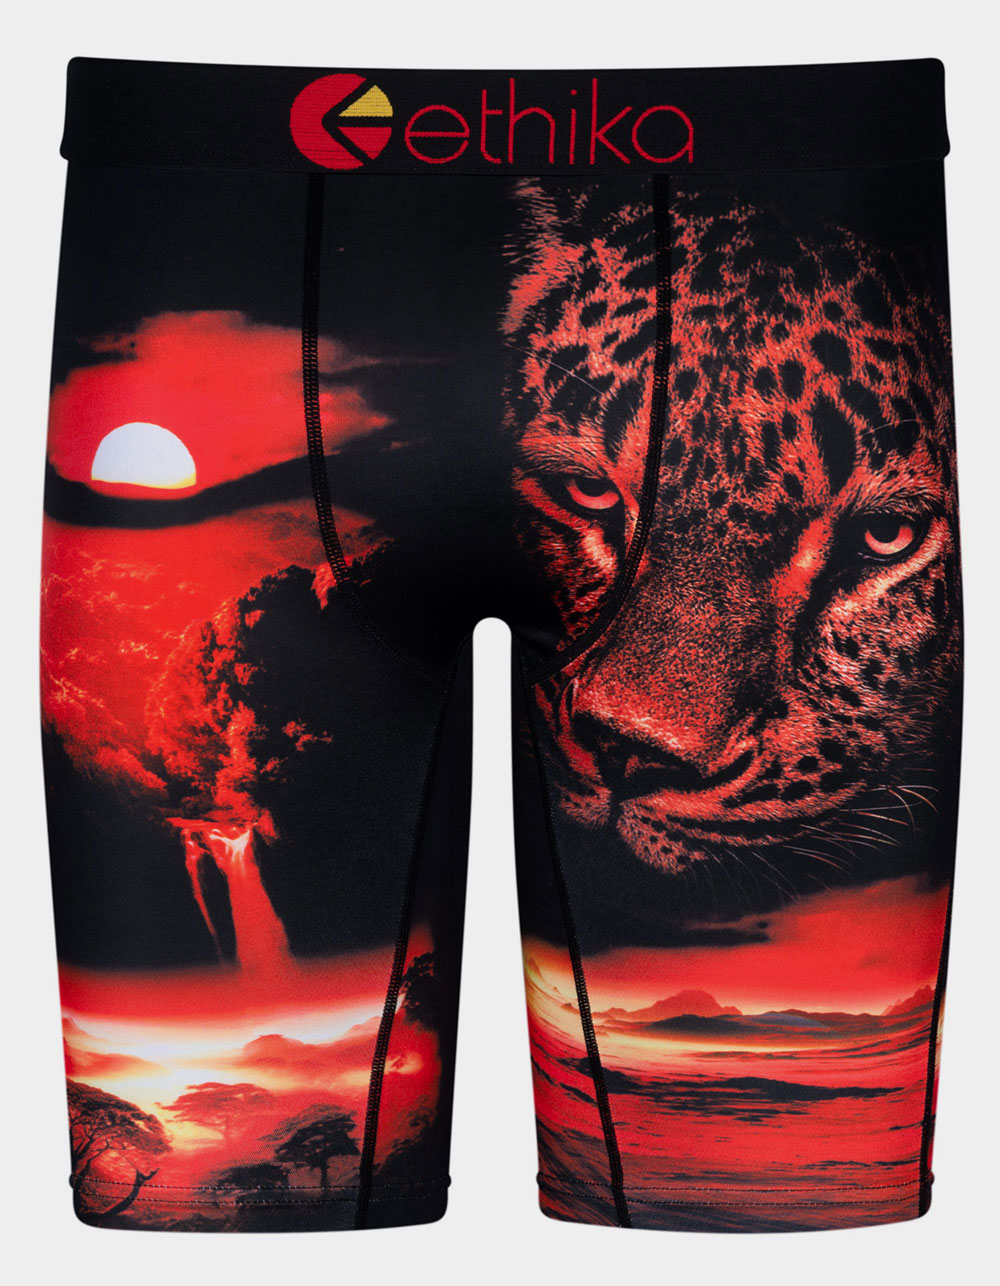 Ethika on X: This print goes crazy! Tiger Pop biker shorts and